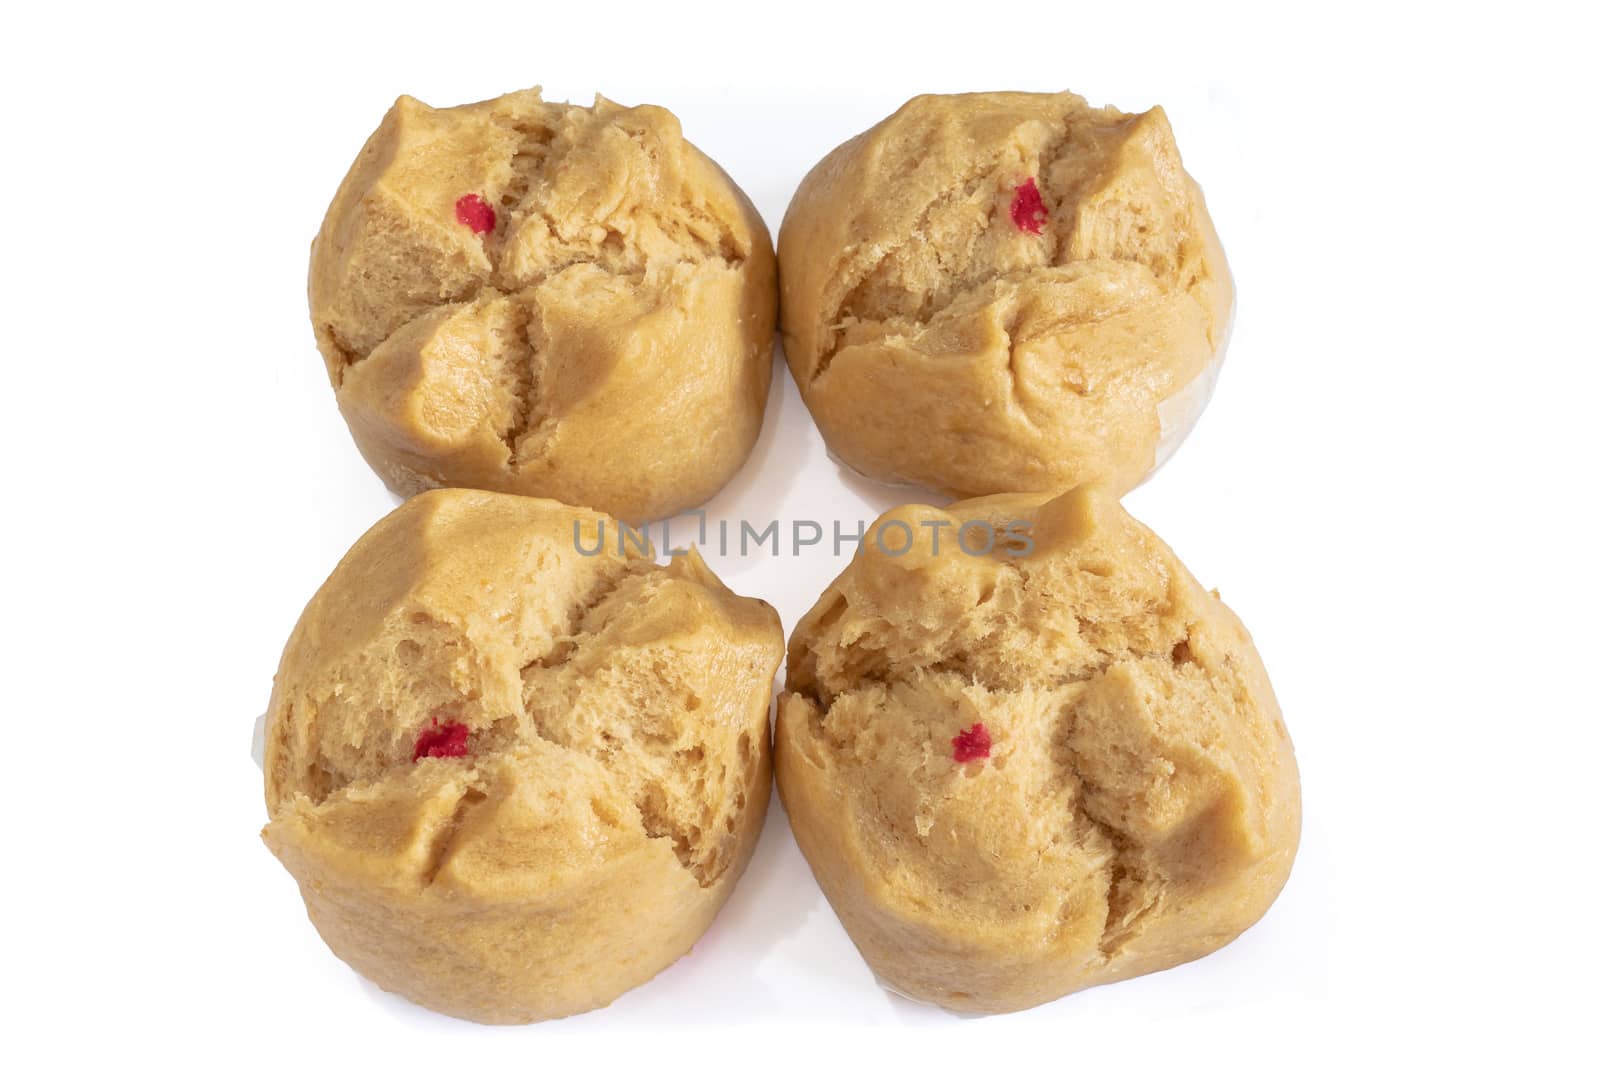 The close up of Chinese brown sugar steamed bread buns on white background.